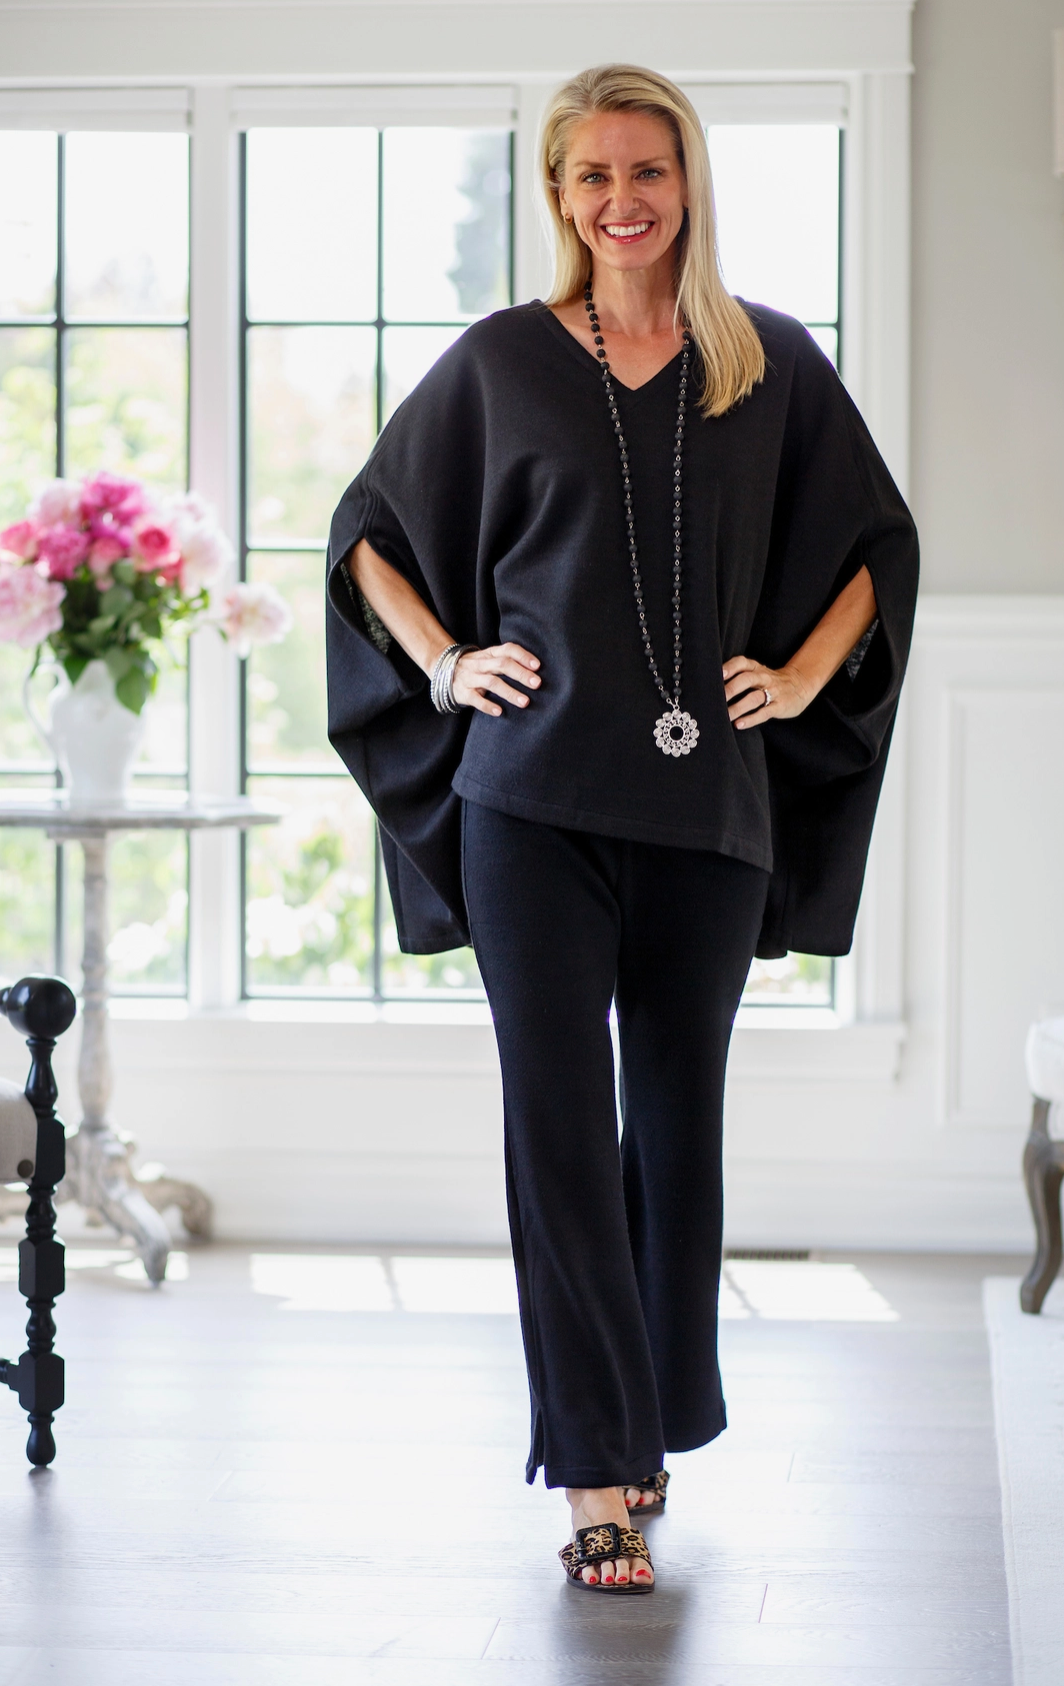 One size fits all poncho with a v-neck and beautiful drape. Looks great over any cami or blouse. A great piece to wear year-round. 